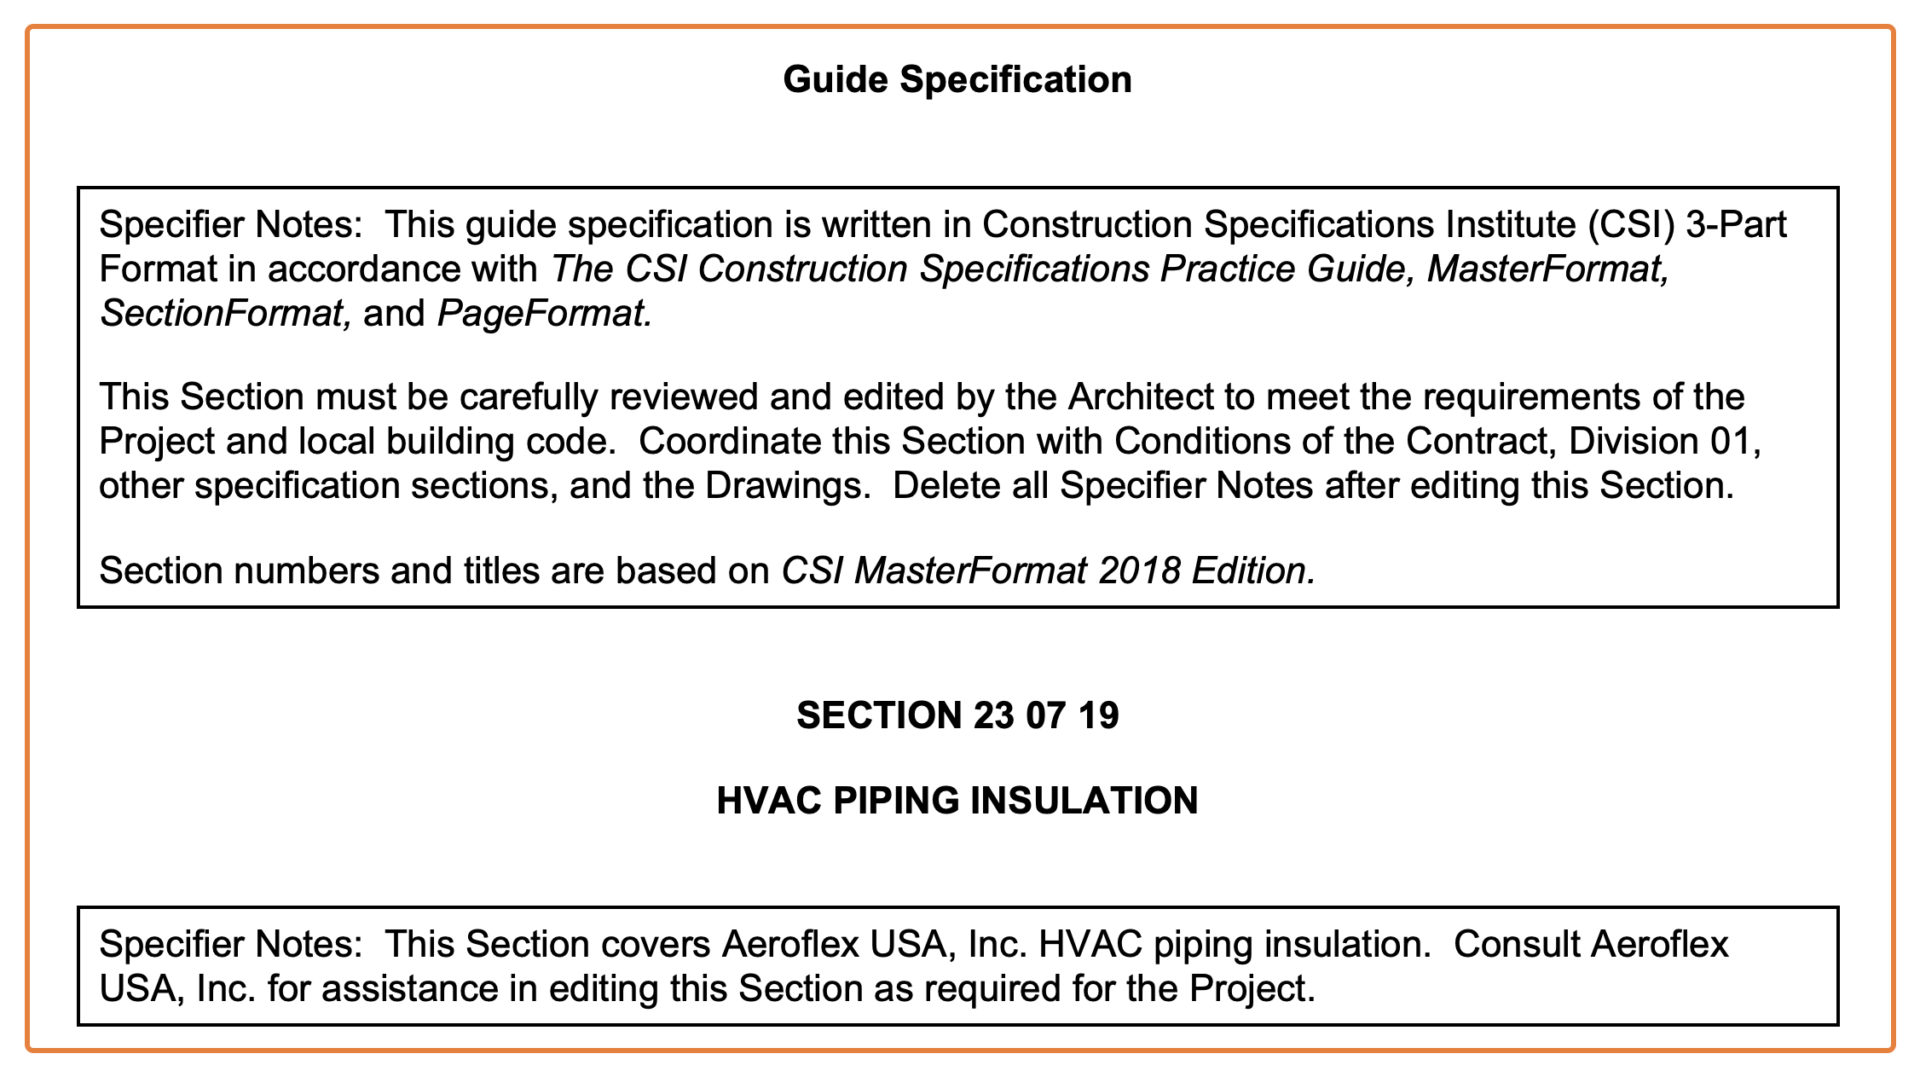 Guide to Insulation Specifications